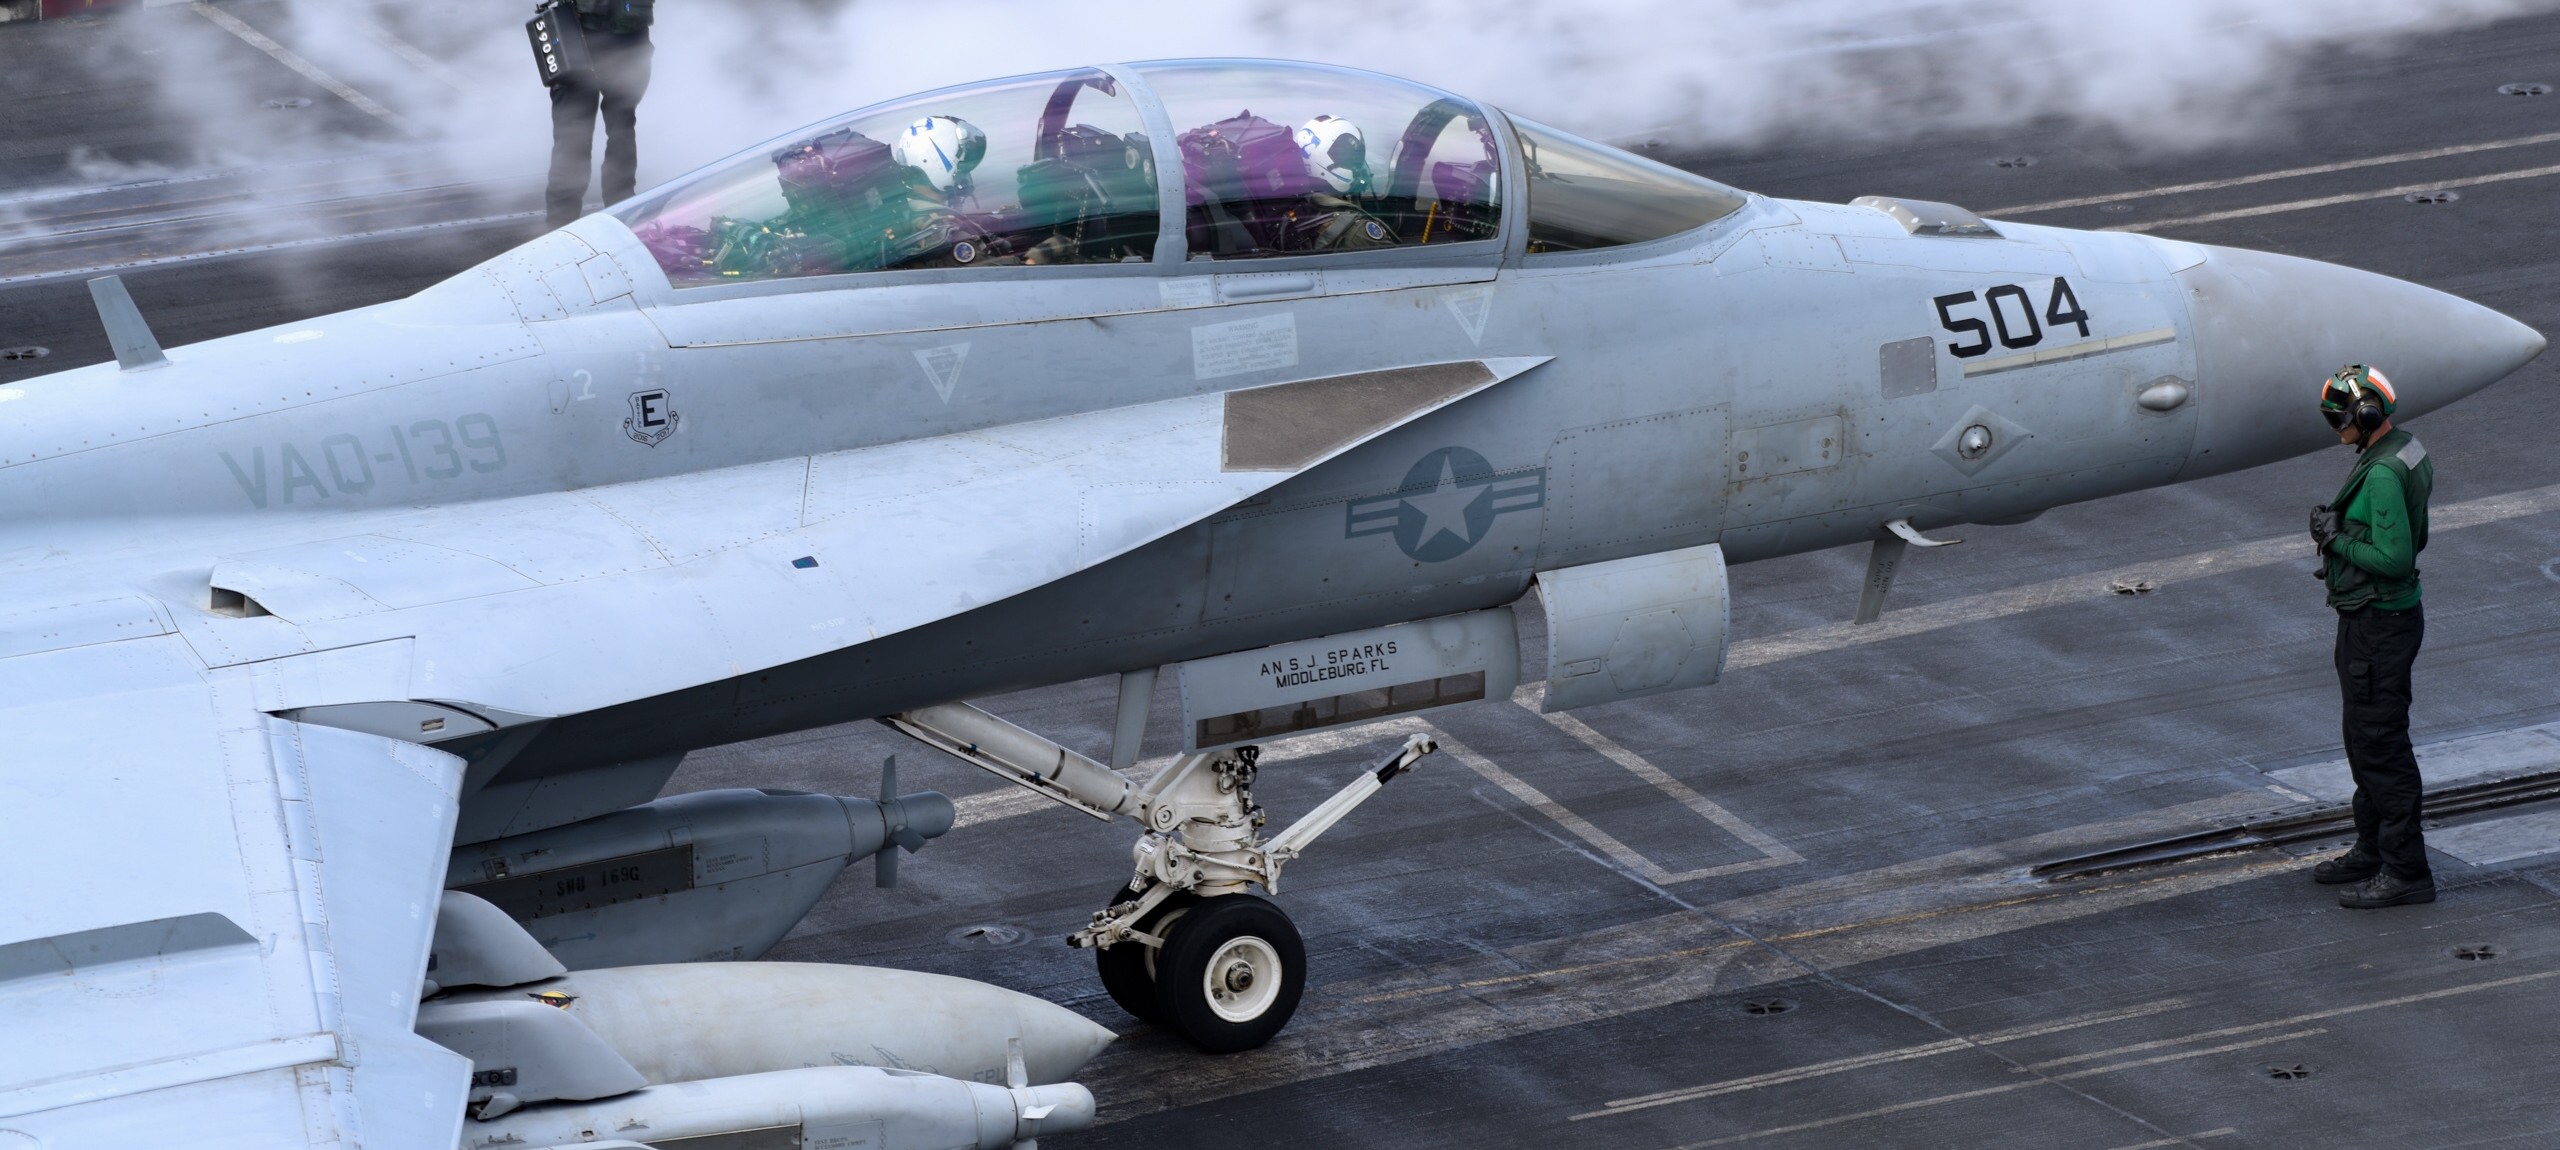 vaq-139 cougars electronic attack squadron us navy ea-18g growler cvw-17 uss theodore roosevelt cvn-71 99